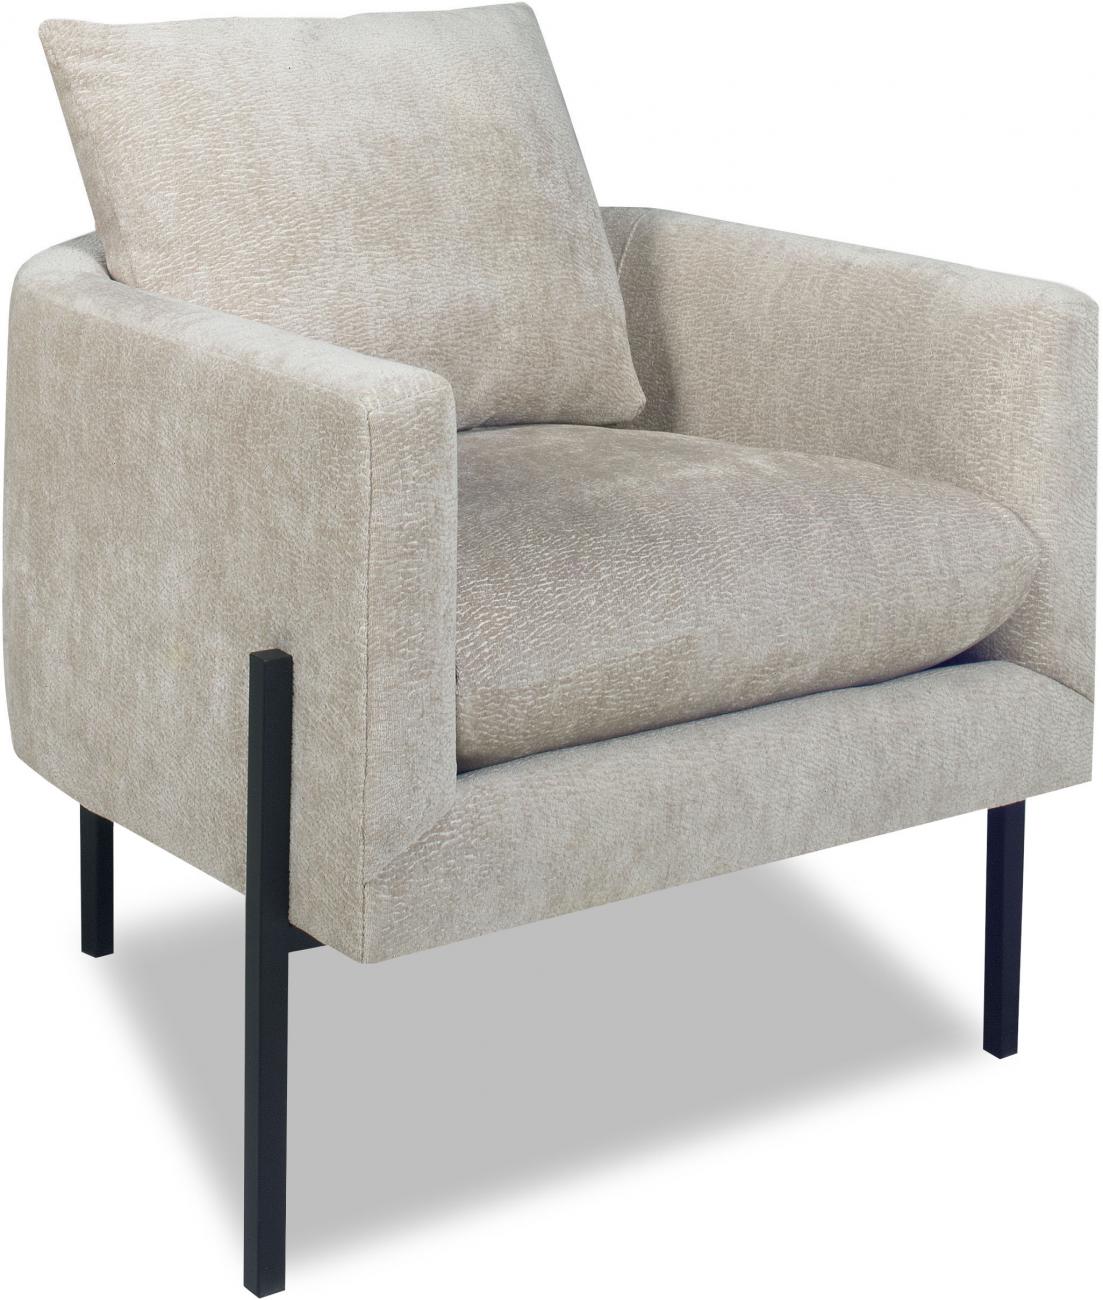 The Jada chair from Temple Furniture